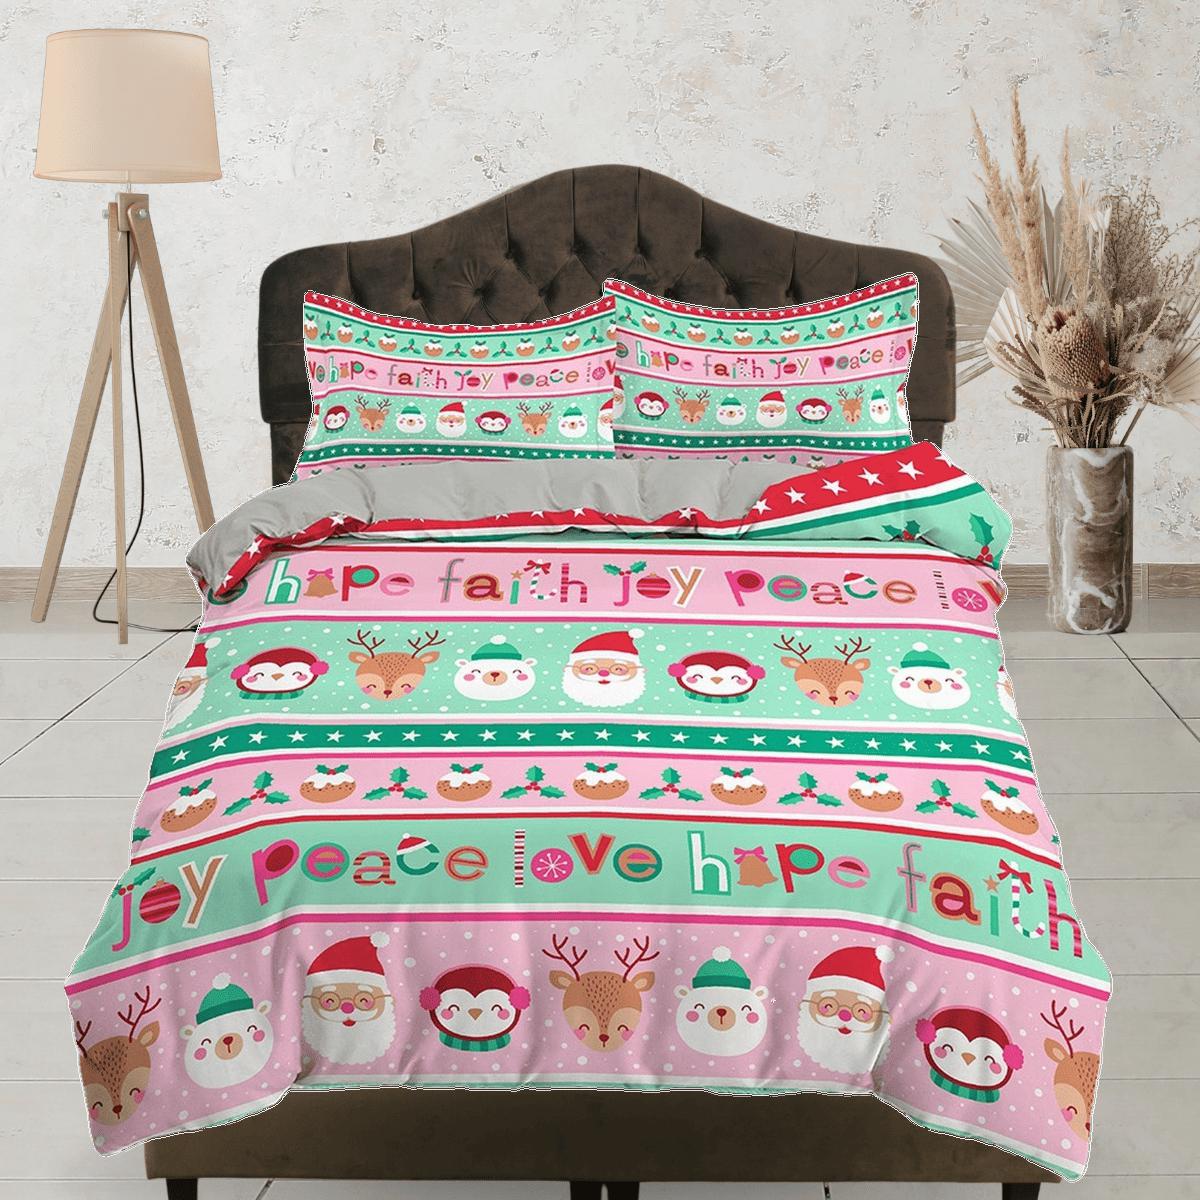 daintyduvet Colorful pink and green santa claus duvet cover set christmas full size bedding & pillowcase, college bedding, toddler bedding, holiday gift